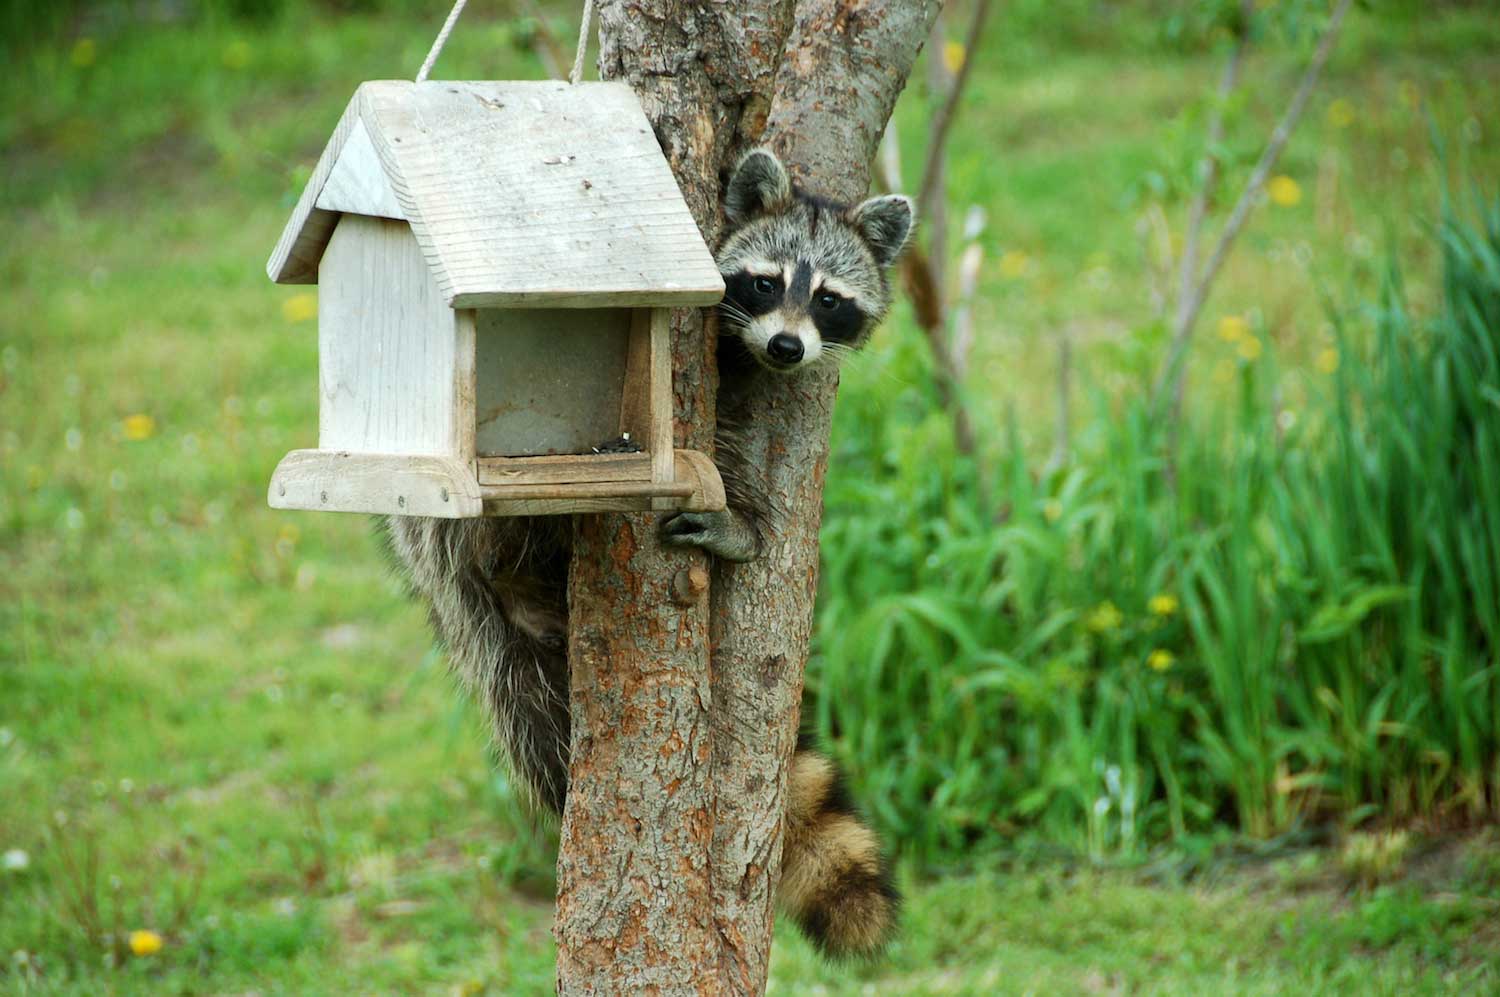 A raccoon hanging on a bird feeder in a tree.